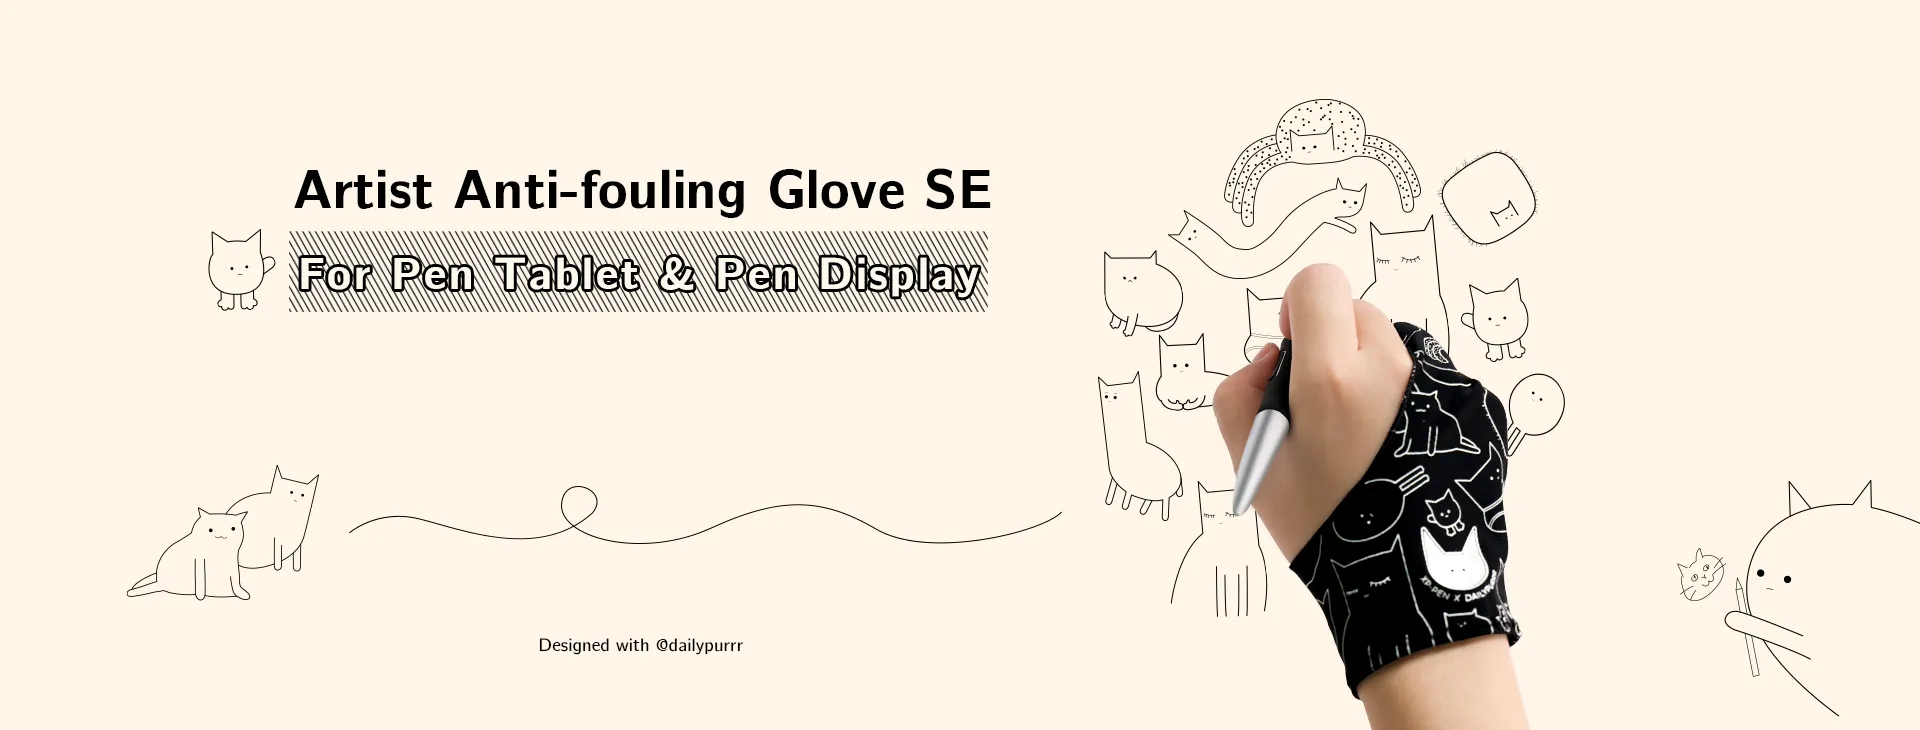 XP-Pen Professional Glove for Drawing Tablet Display Artist Anti-fouling  S/M/L